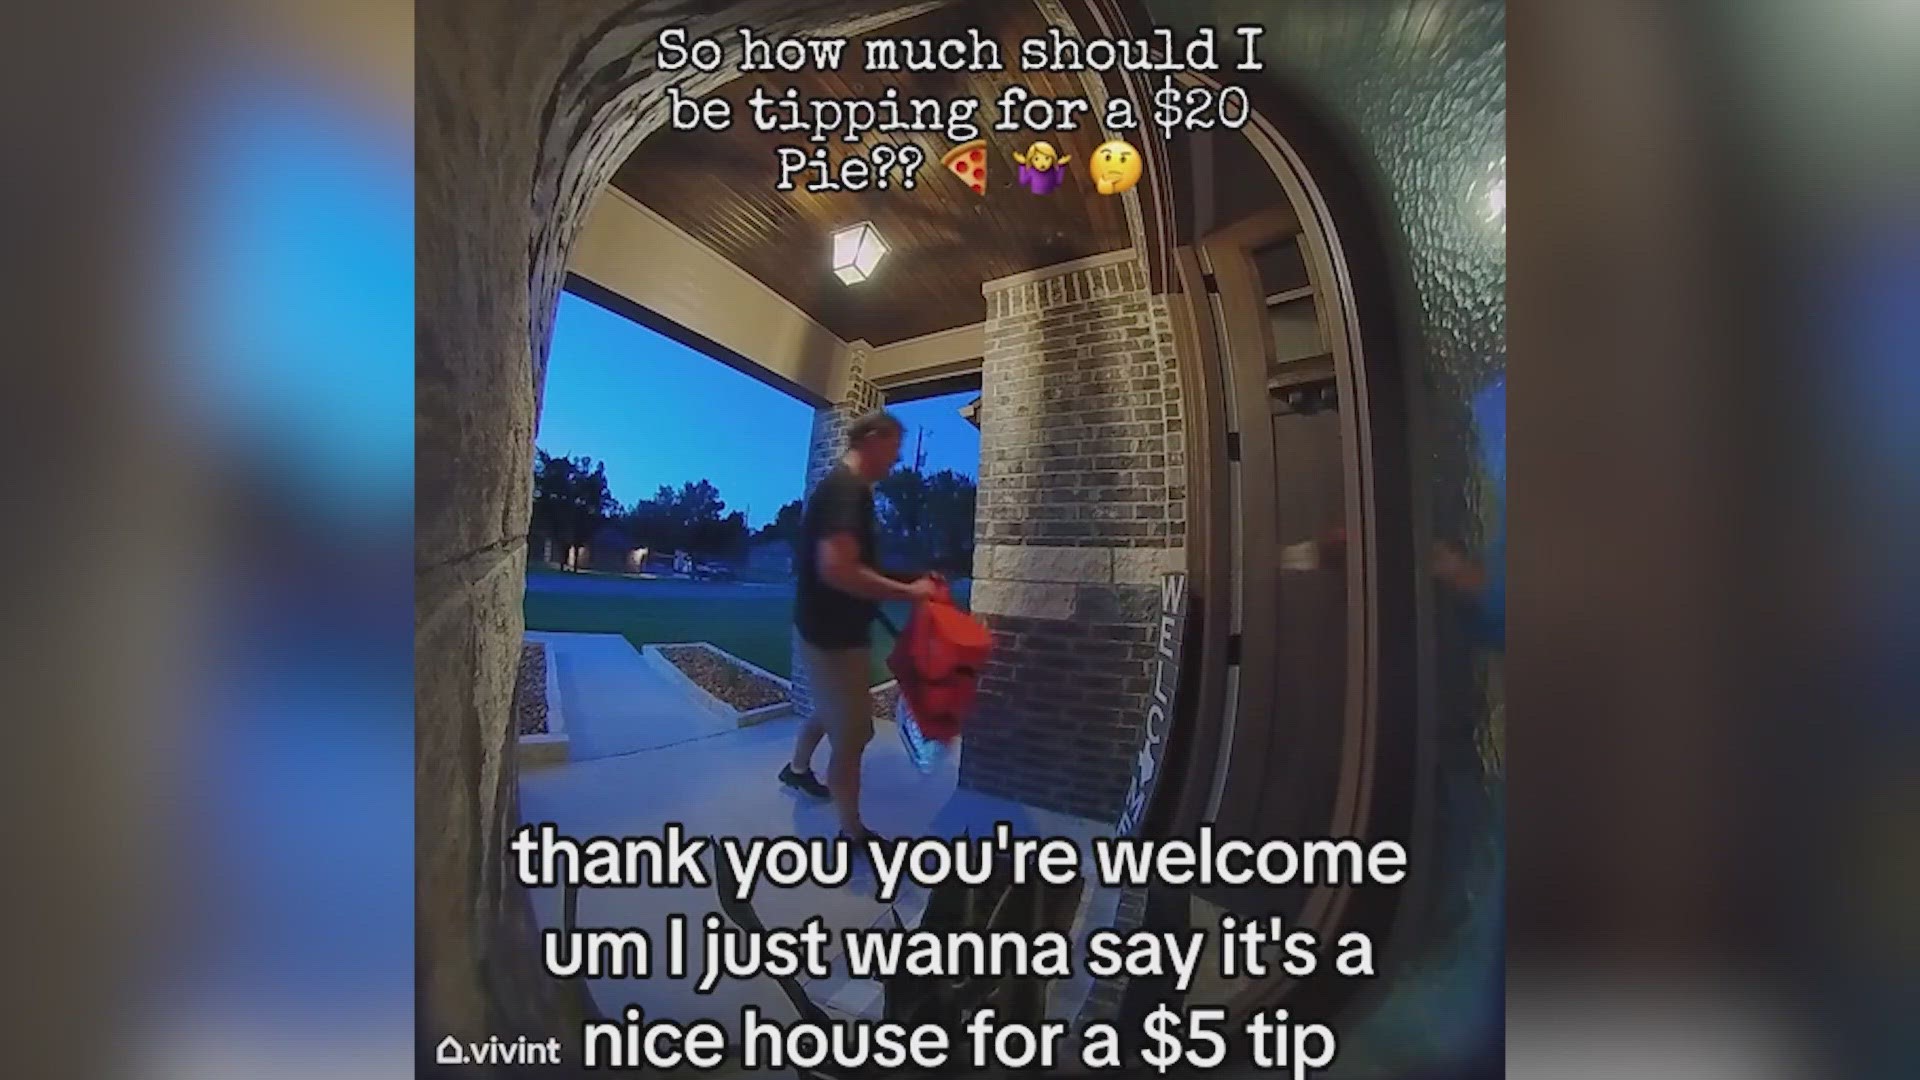 "I just want to say it's a nice house for a $5 tip," the driver can be heard saying as he walks away from a home in door bell camera video posted on TikTok.